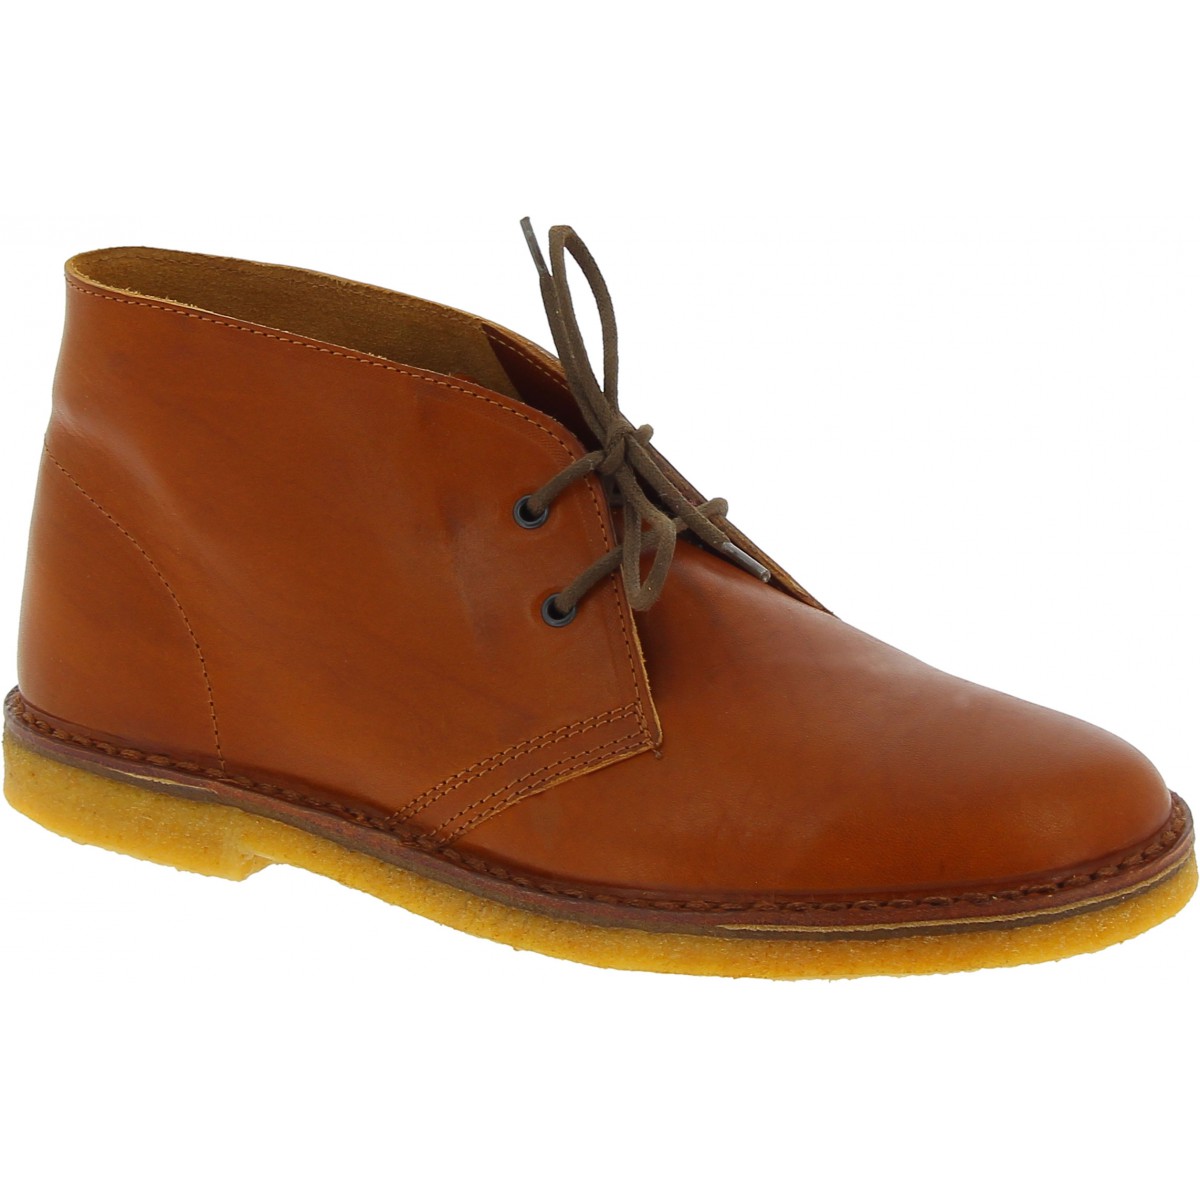 tan leather chukka boots handmade in Italy | The leather craftsmen